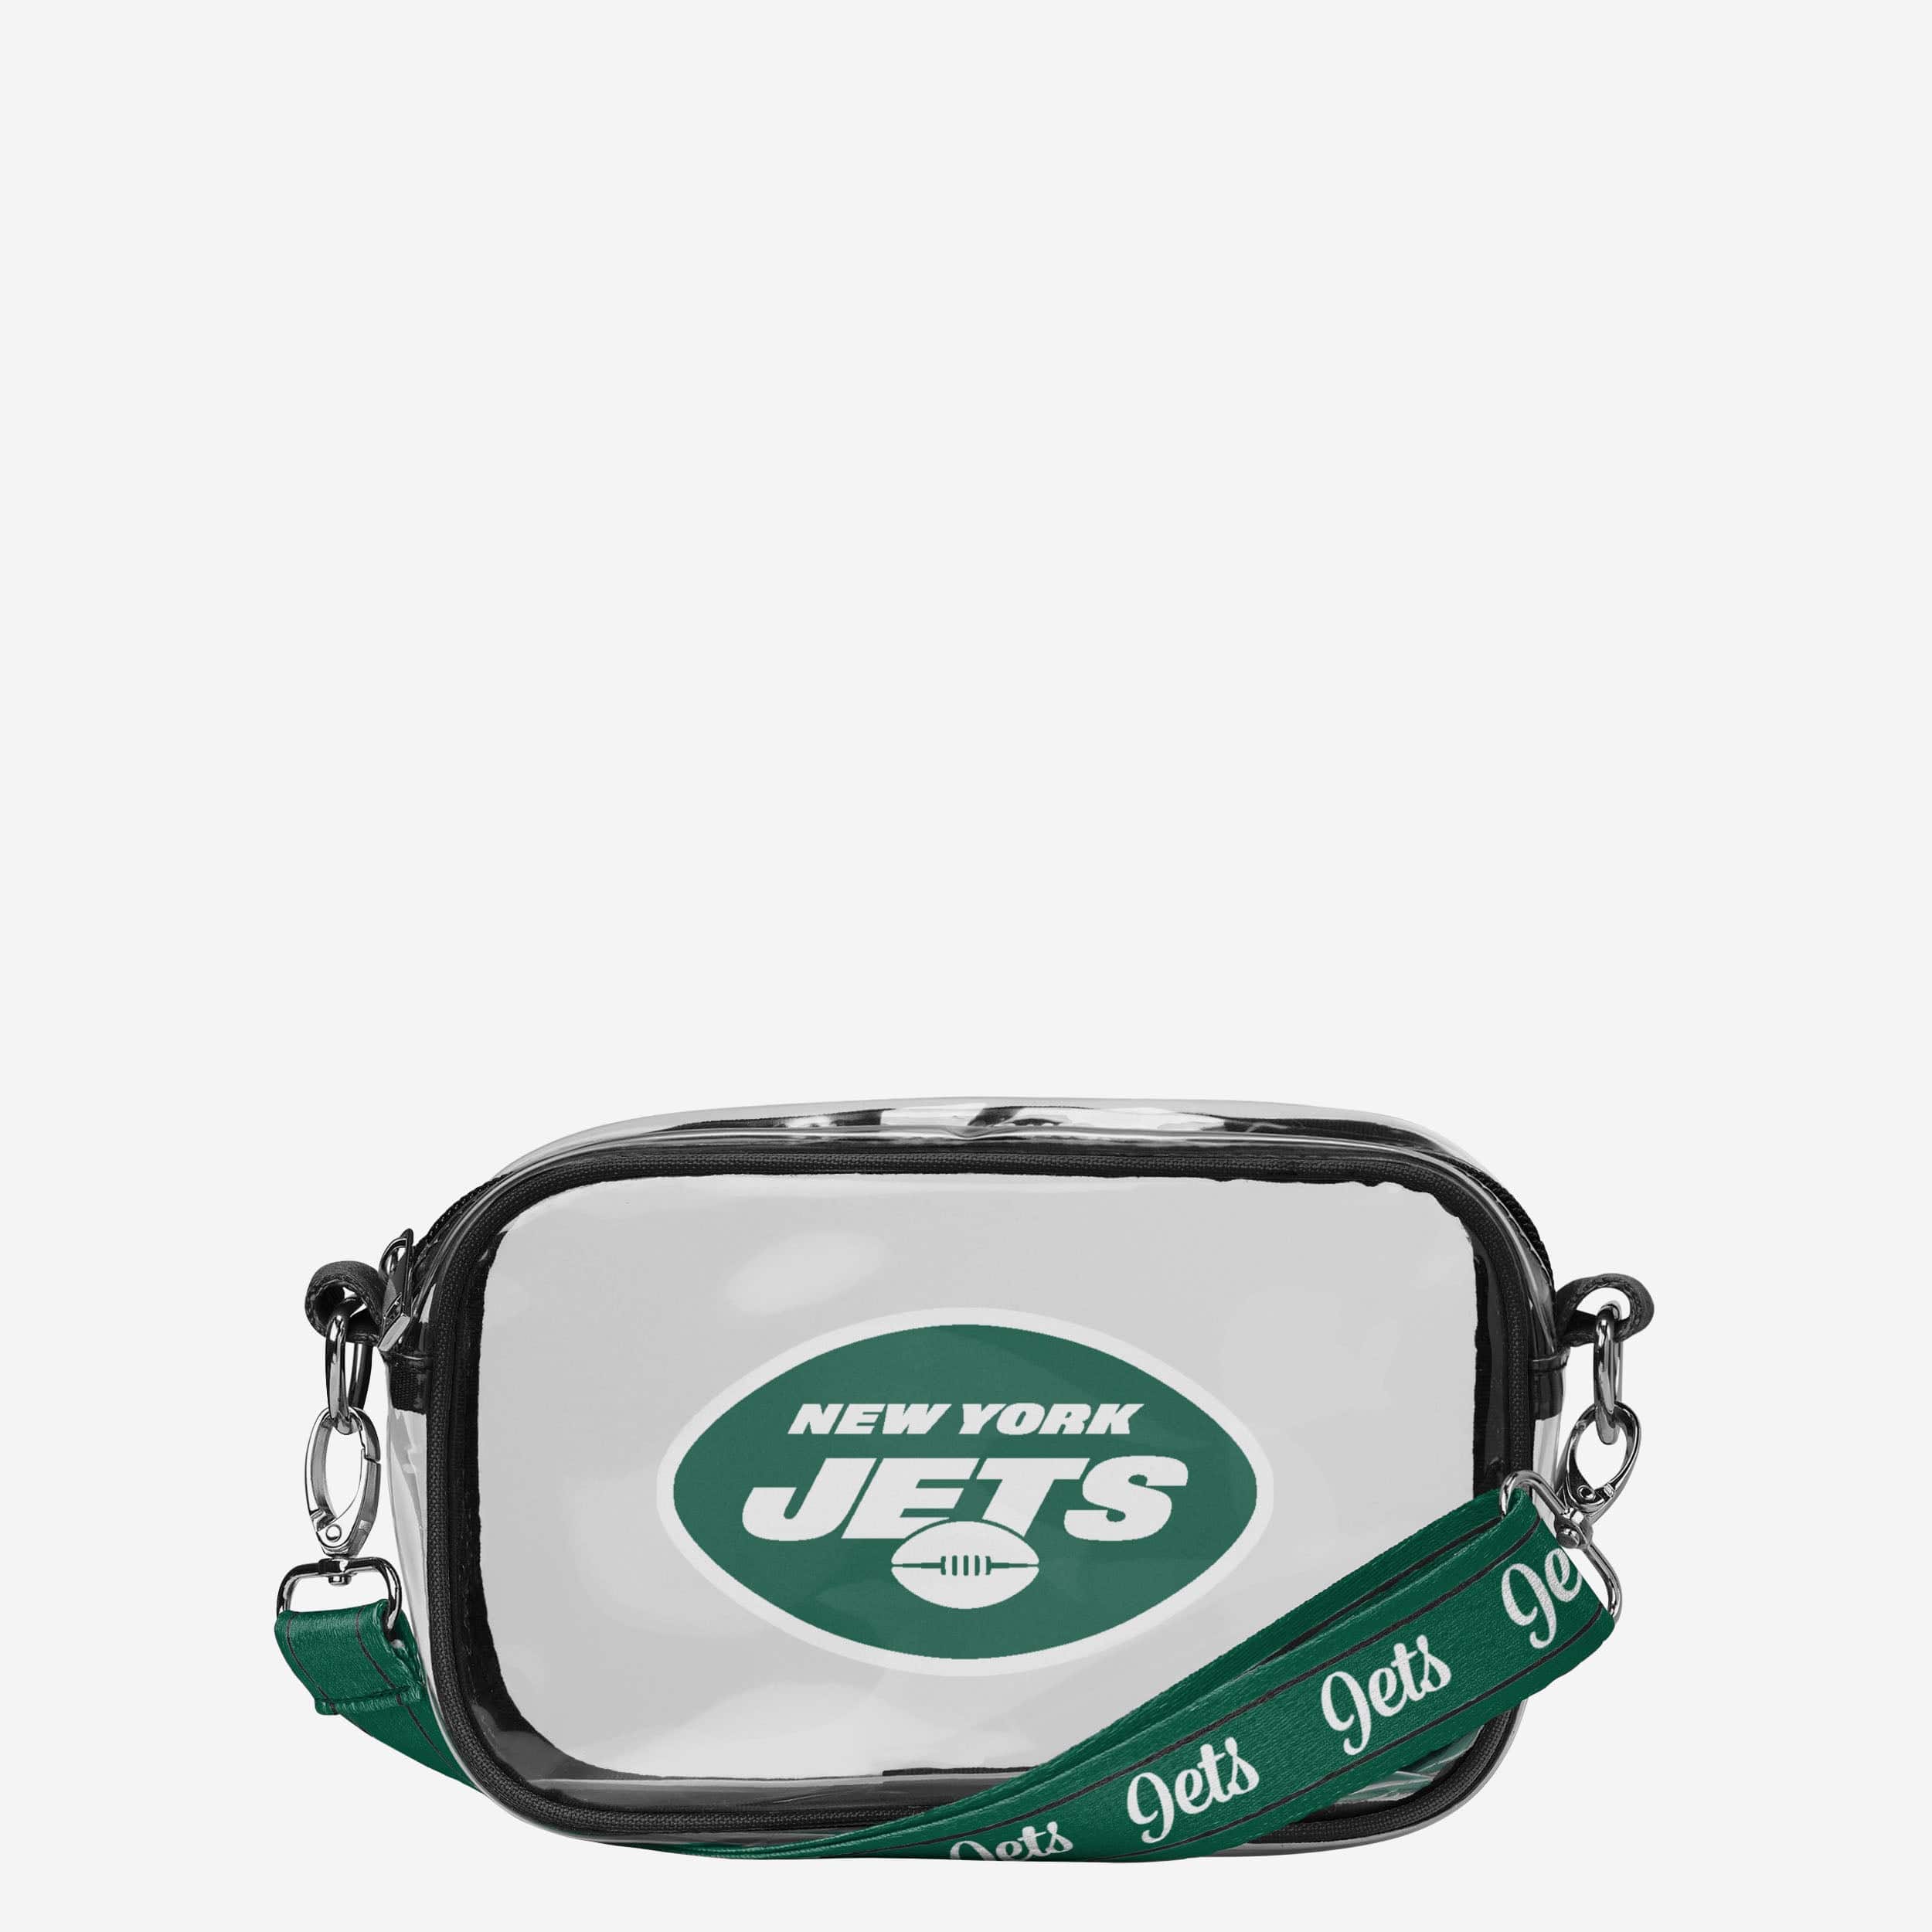 New York Jets 4 Pack Reusable Shopping Bag FOCO